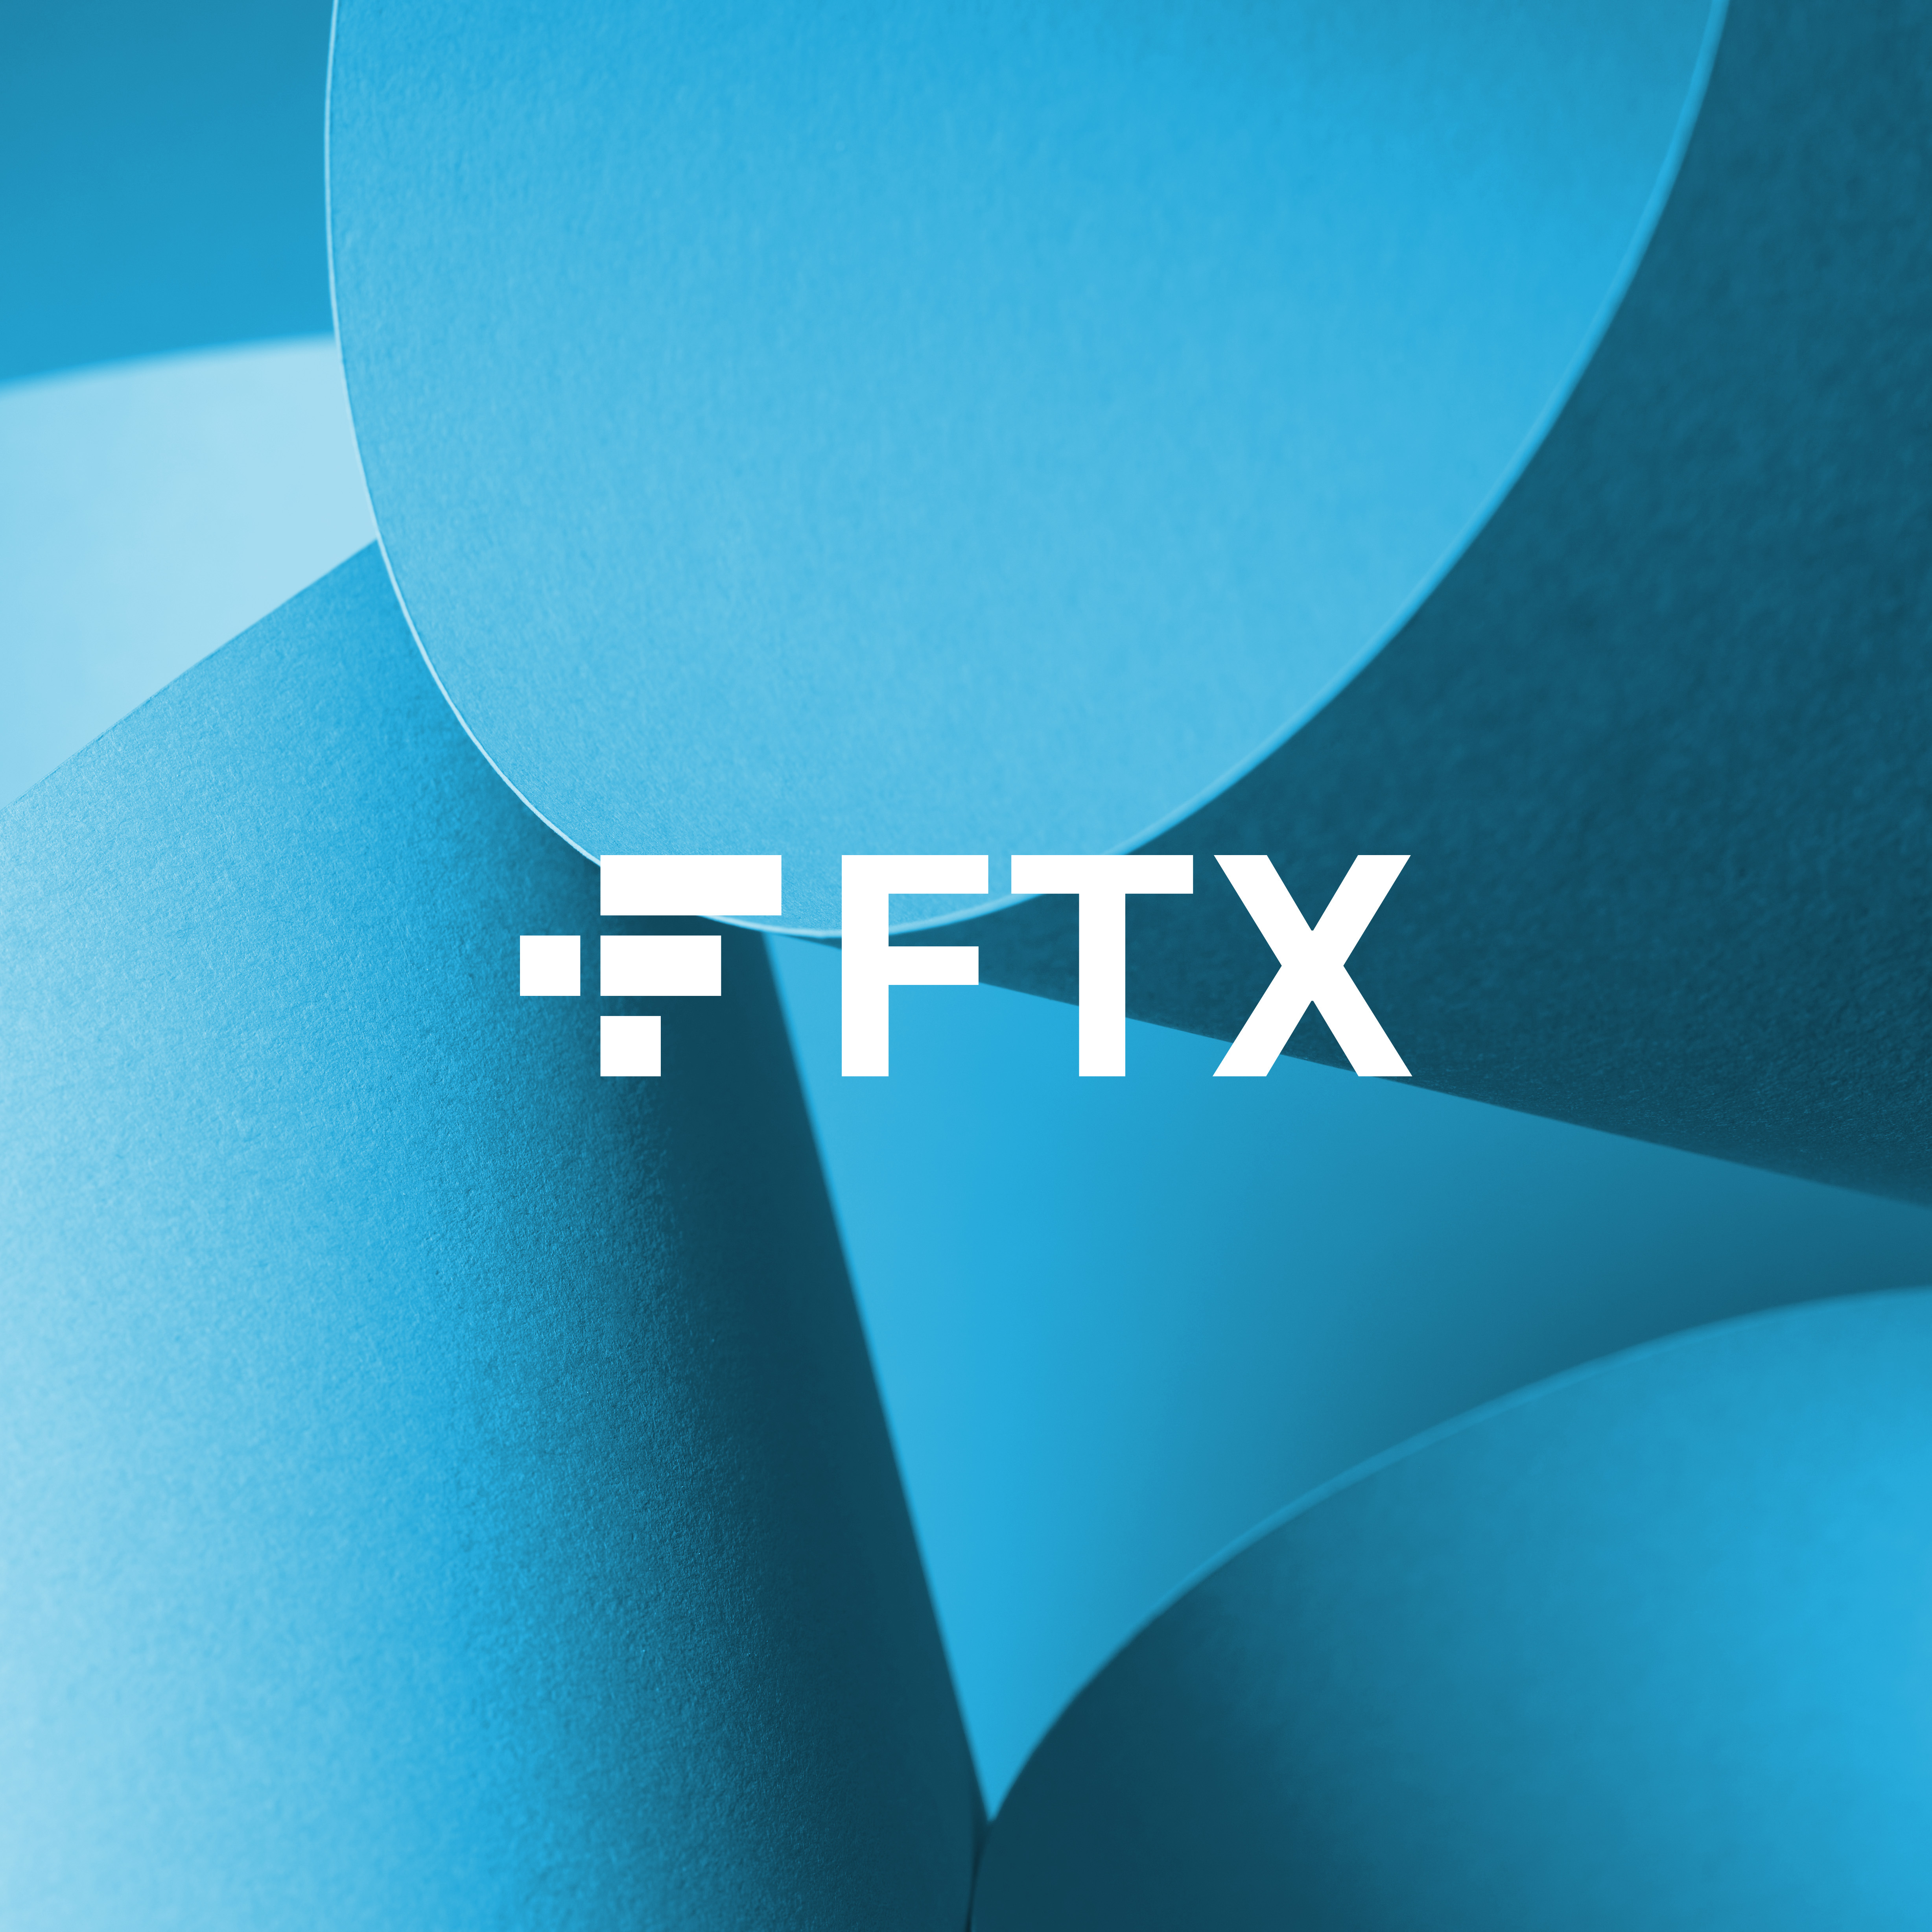 FTX: The Collapse of a Crypto Powerhouse